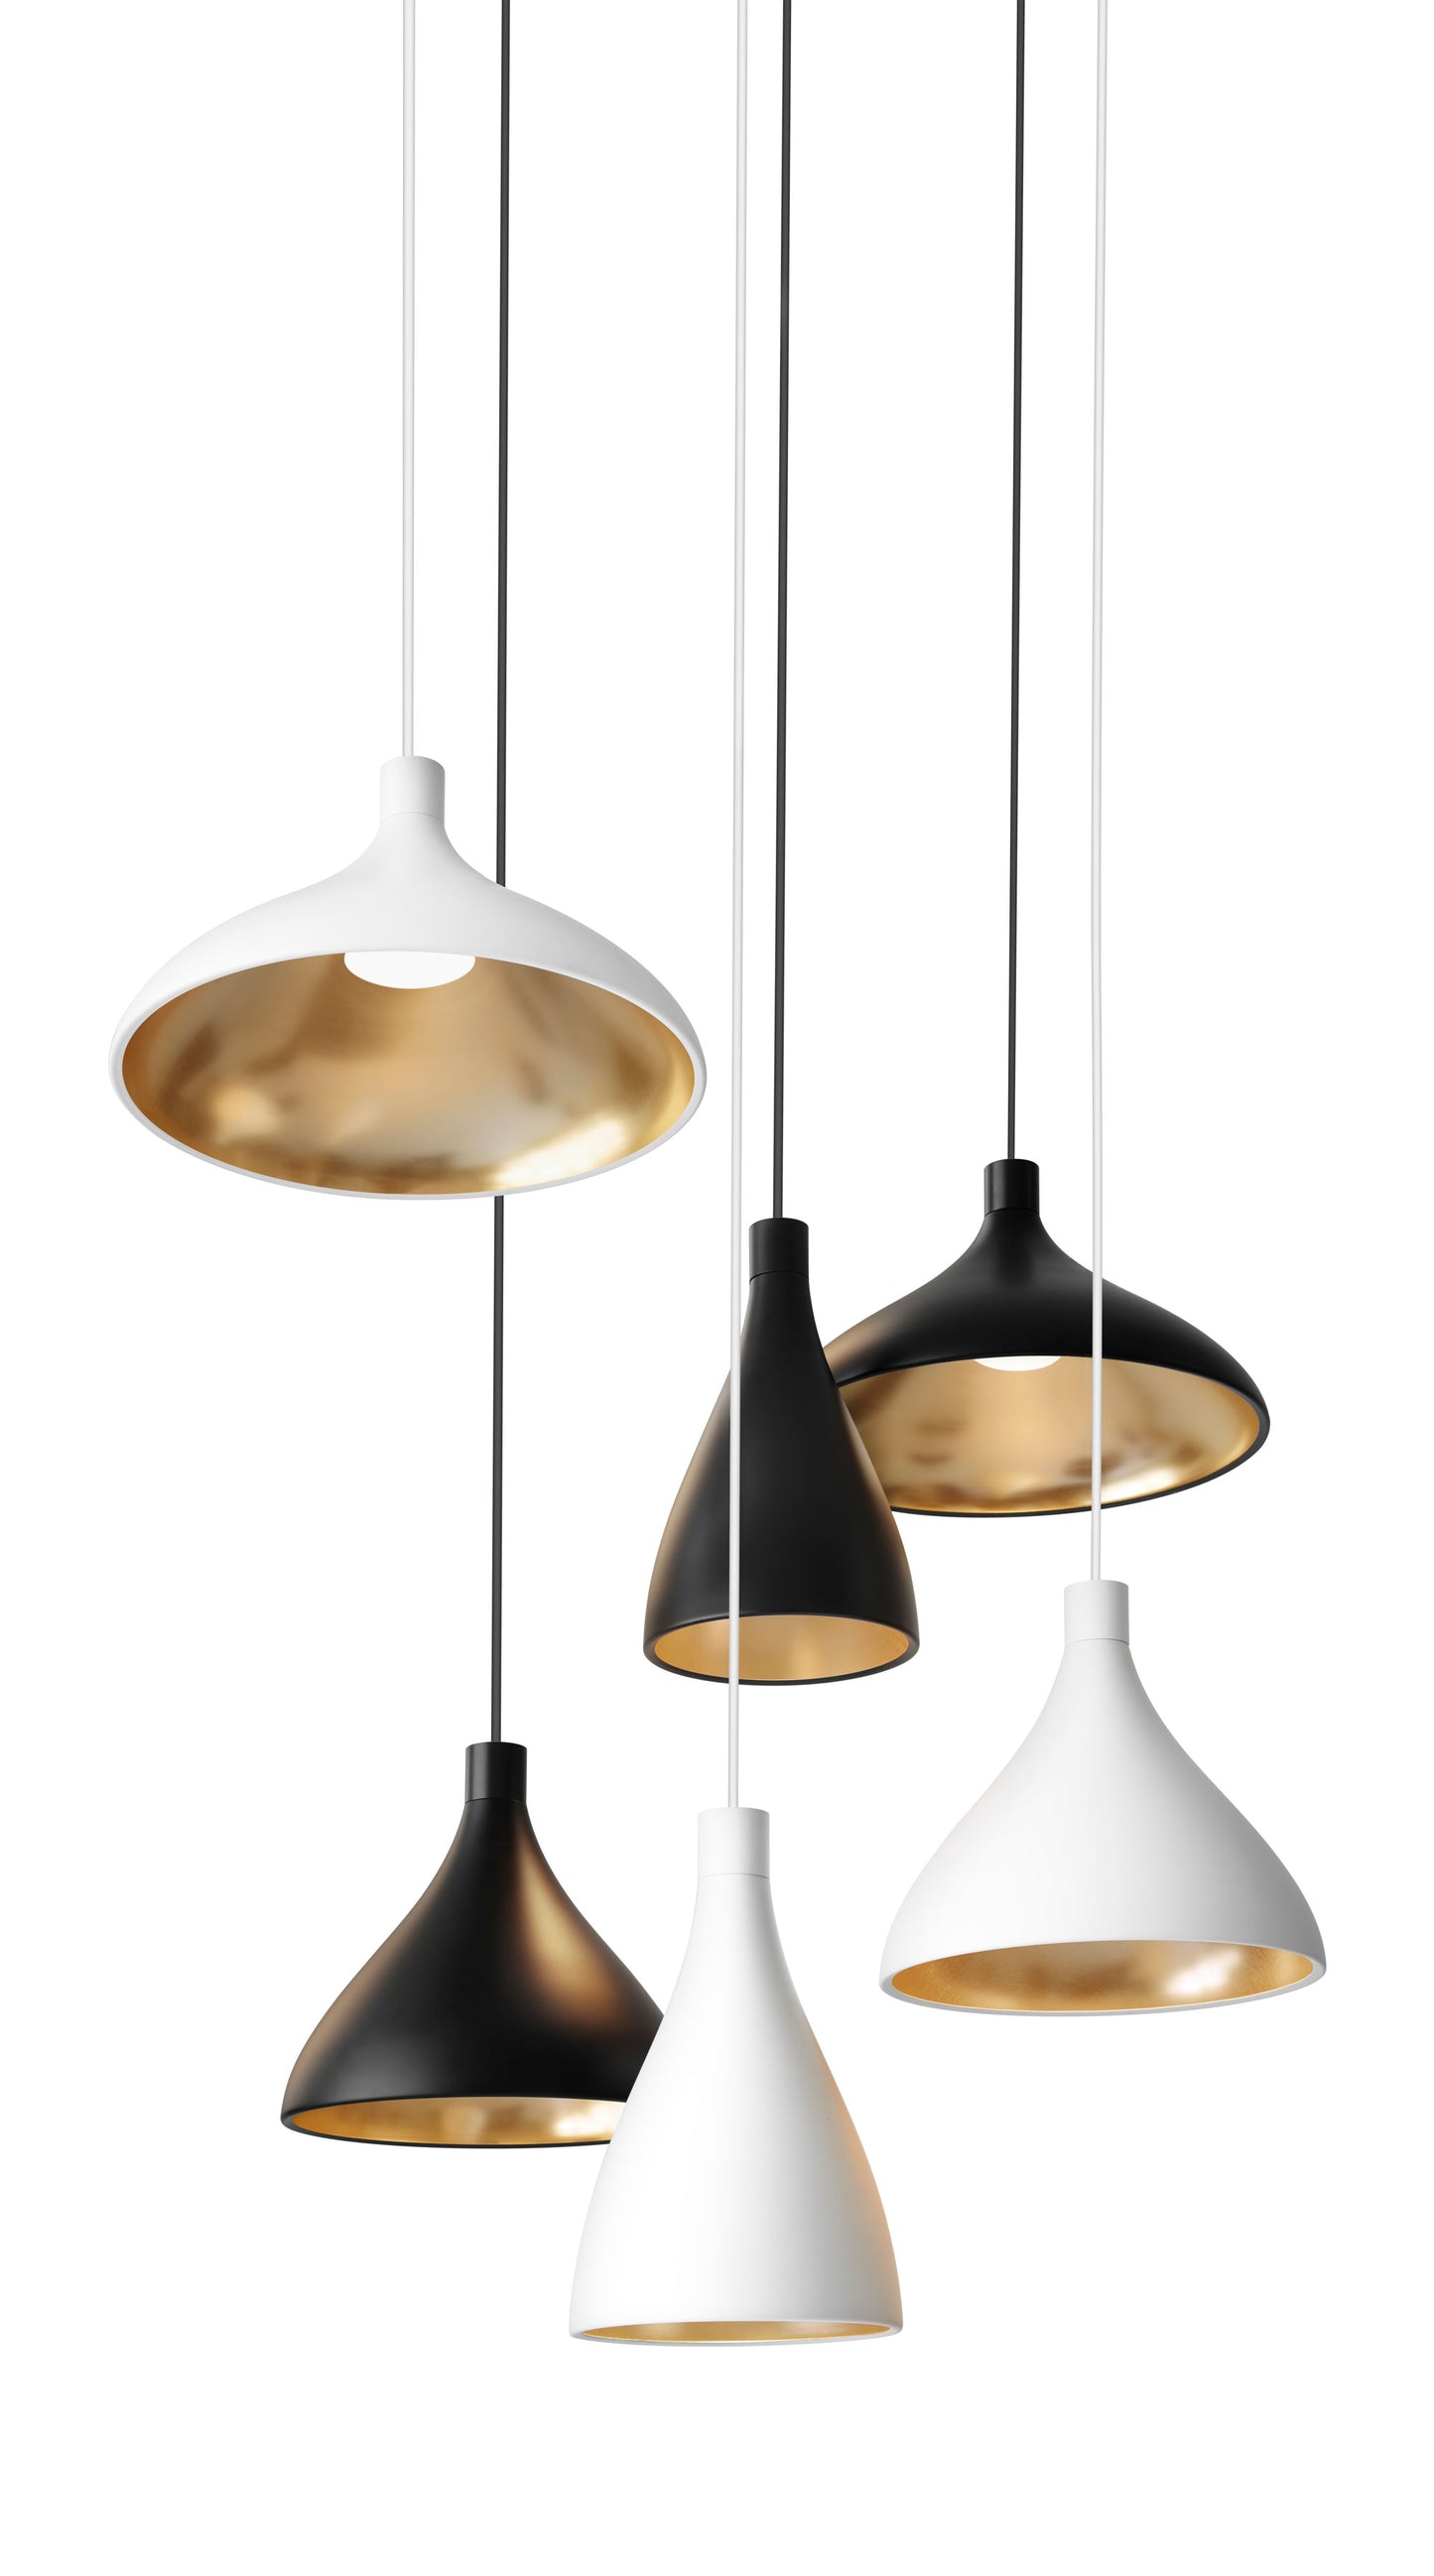 Swell Pendant Light by Pablo Designs